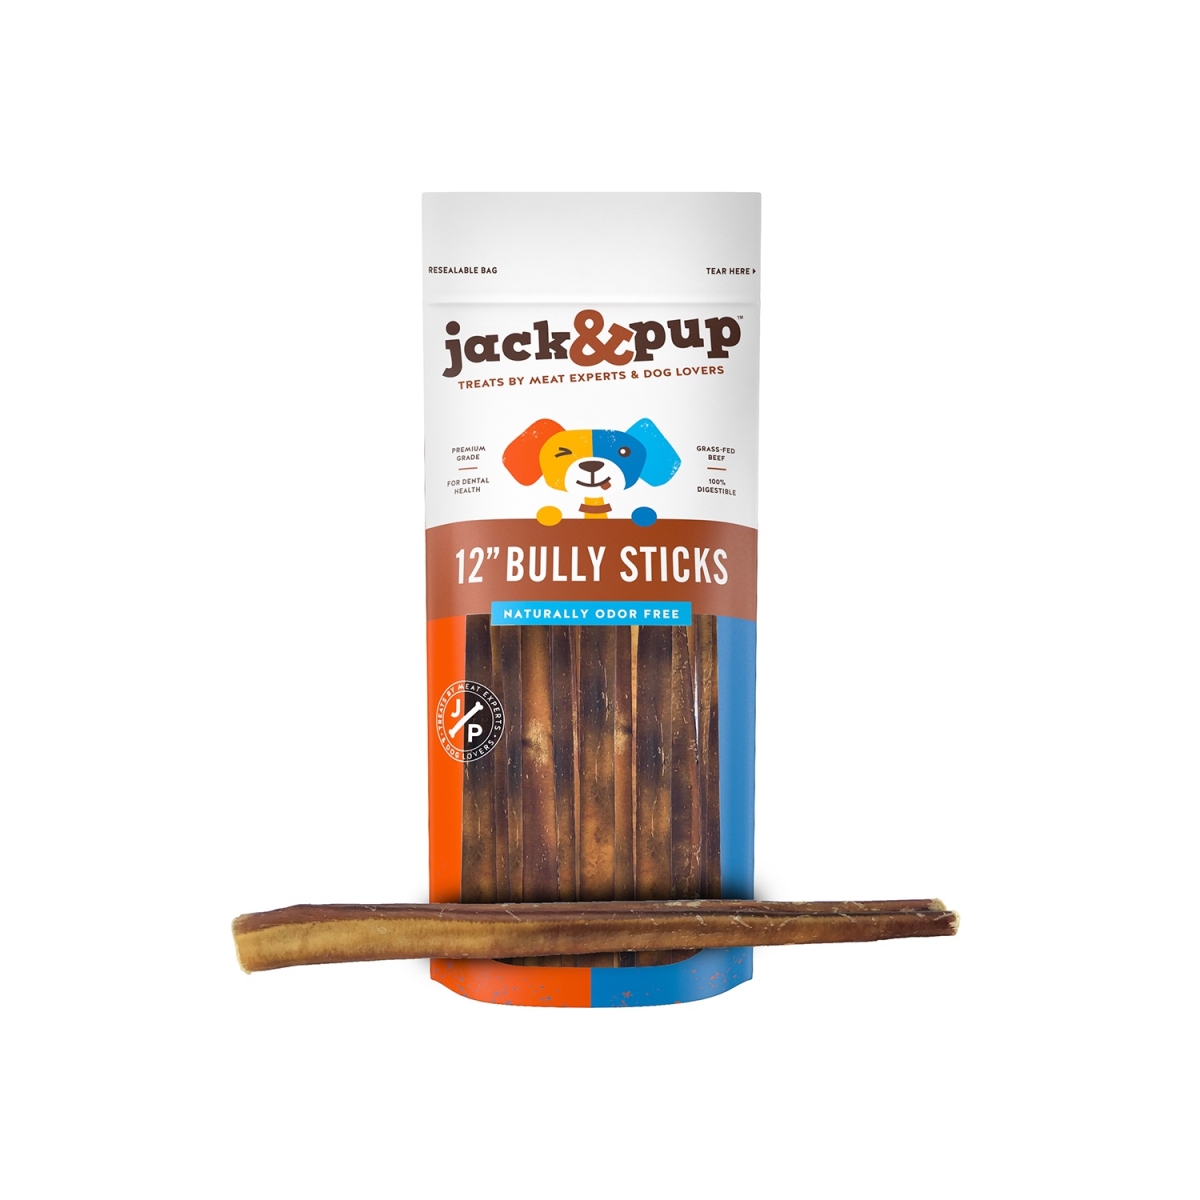 857089 12 In. Bully Sticks Treat For Dogs - 3 Piece